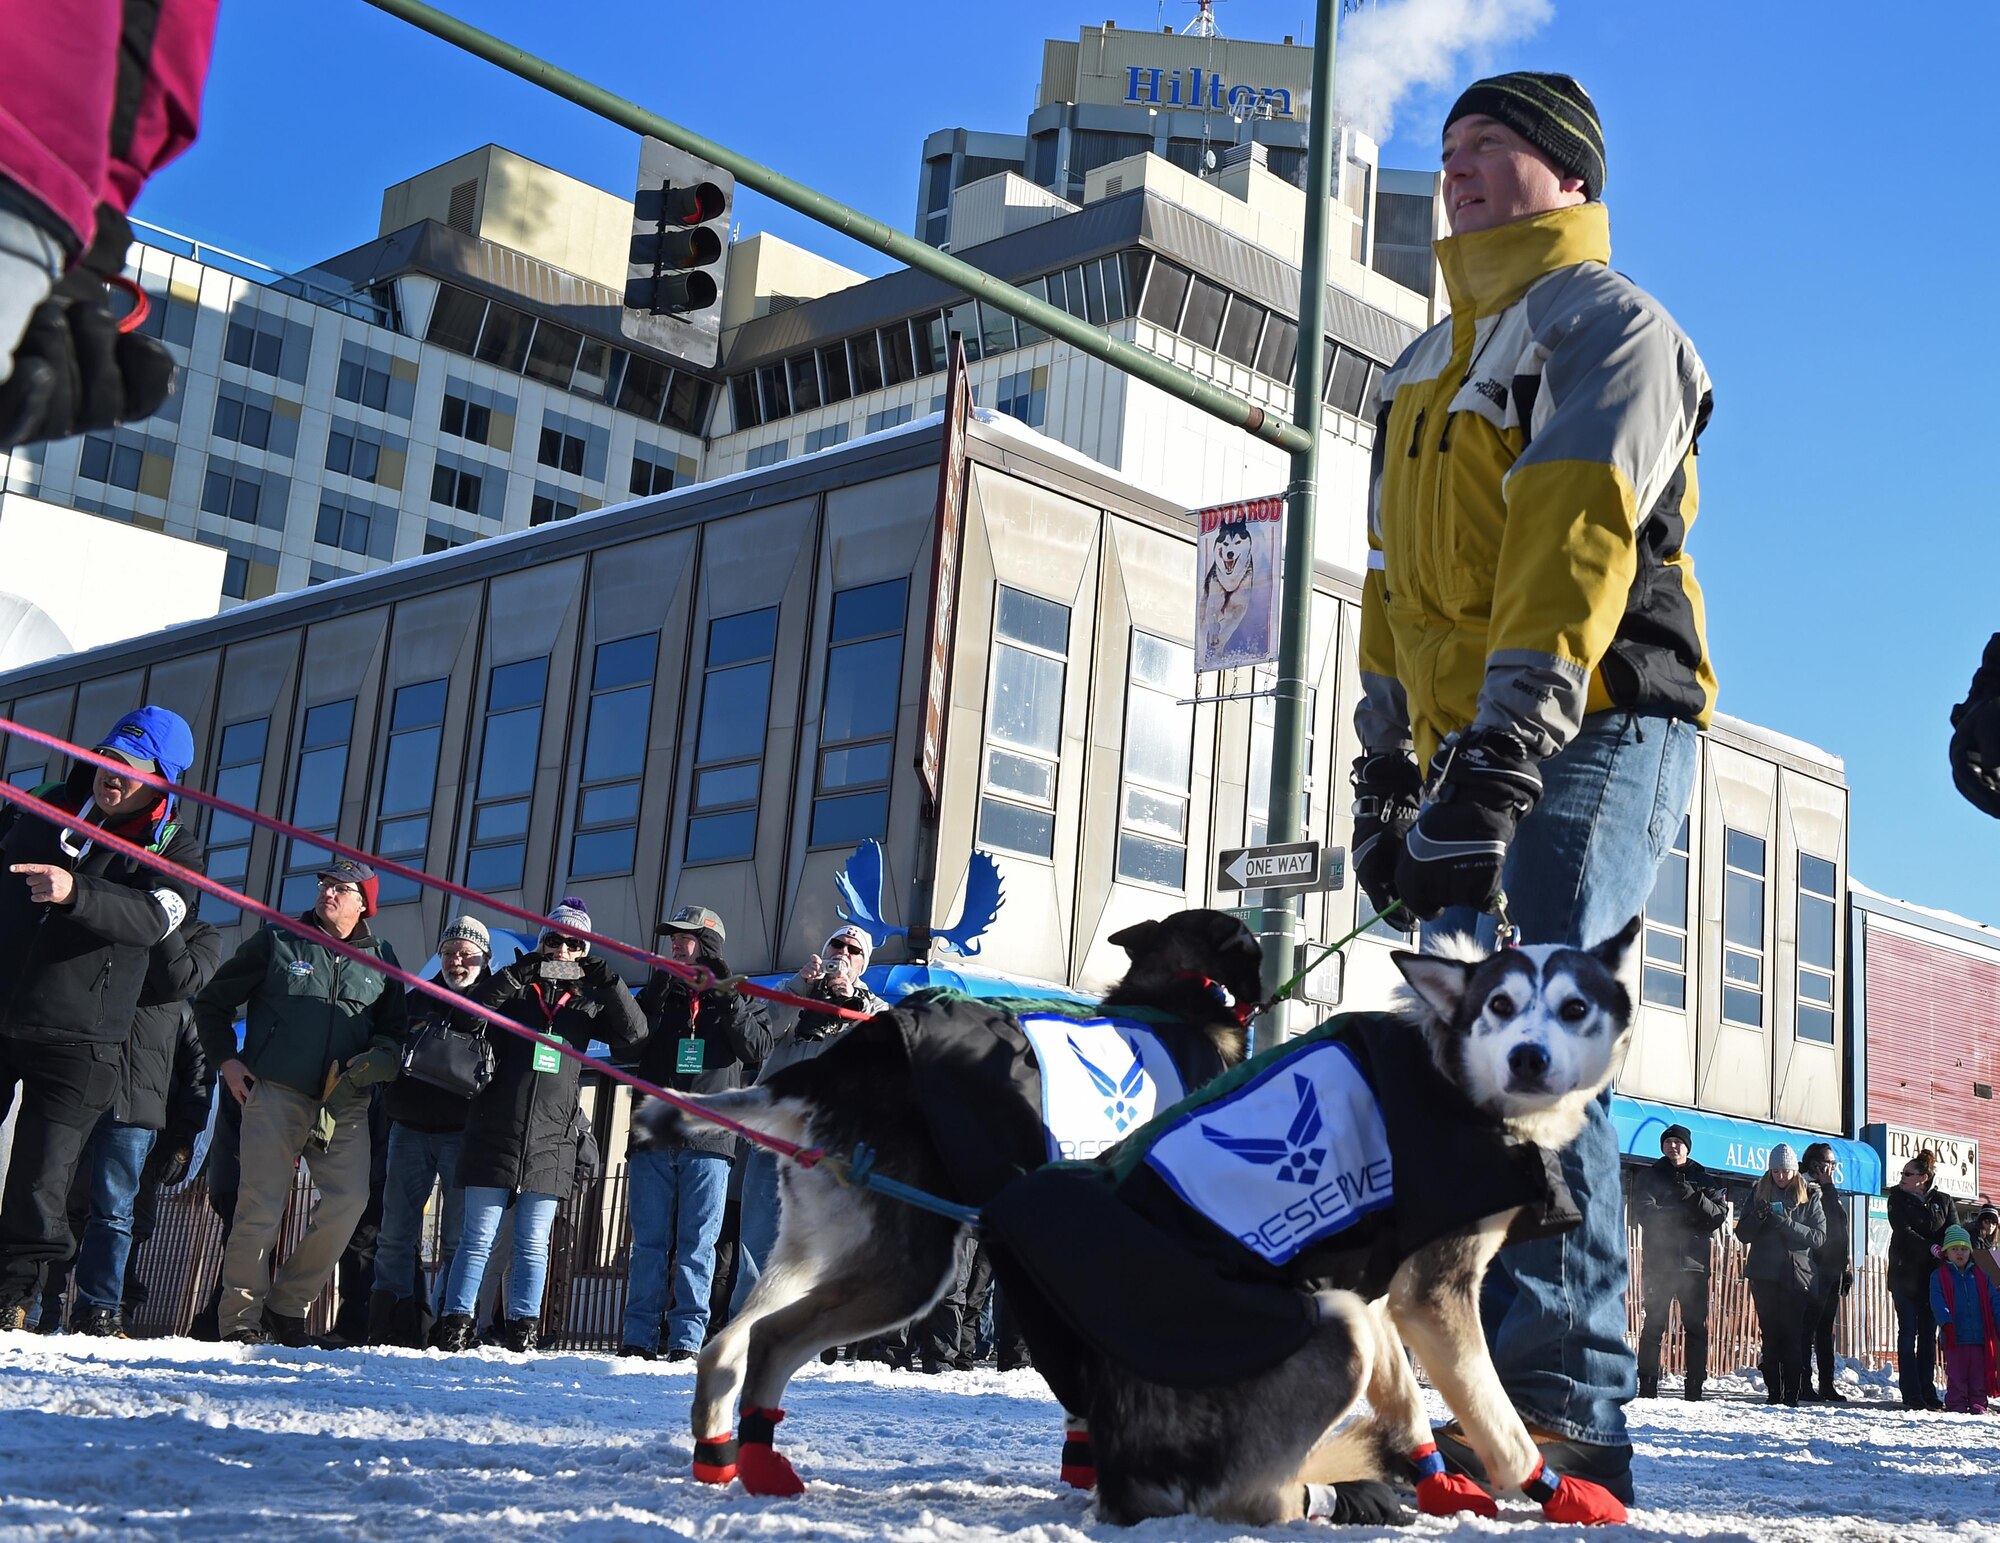 Air Force Col. George T.M. Dietrich III, Joint Base Elmendorf-Richardson and 673d Air Base Wing commander, holds on to Air Force Lt. Col. Roger Lee’s sled dogs at the 45th annual Iditarod Trail Sled Dog Race in Anchorage, Alaska, March 4, 2017. More than 1,150 dogs pulled 72 mushers for the day’s 11 mile run to Campbell Airstrip. 